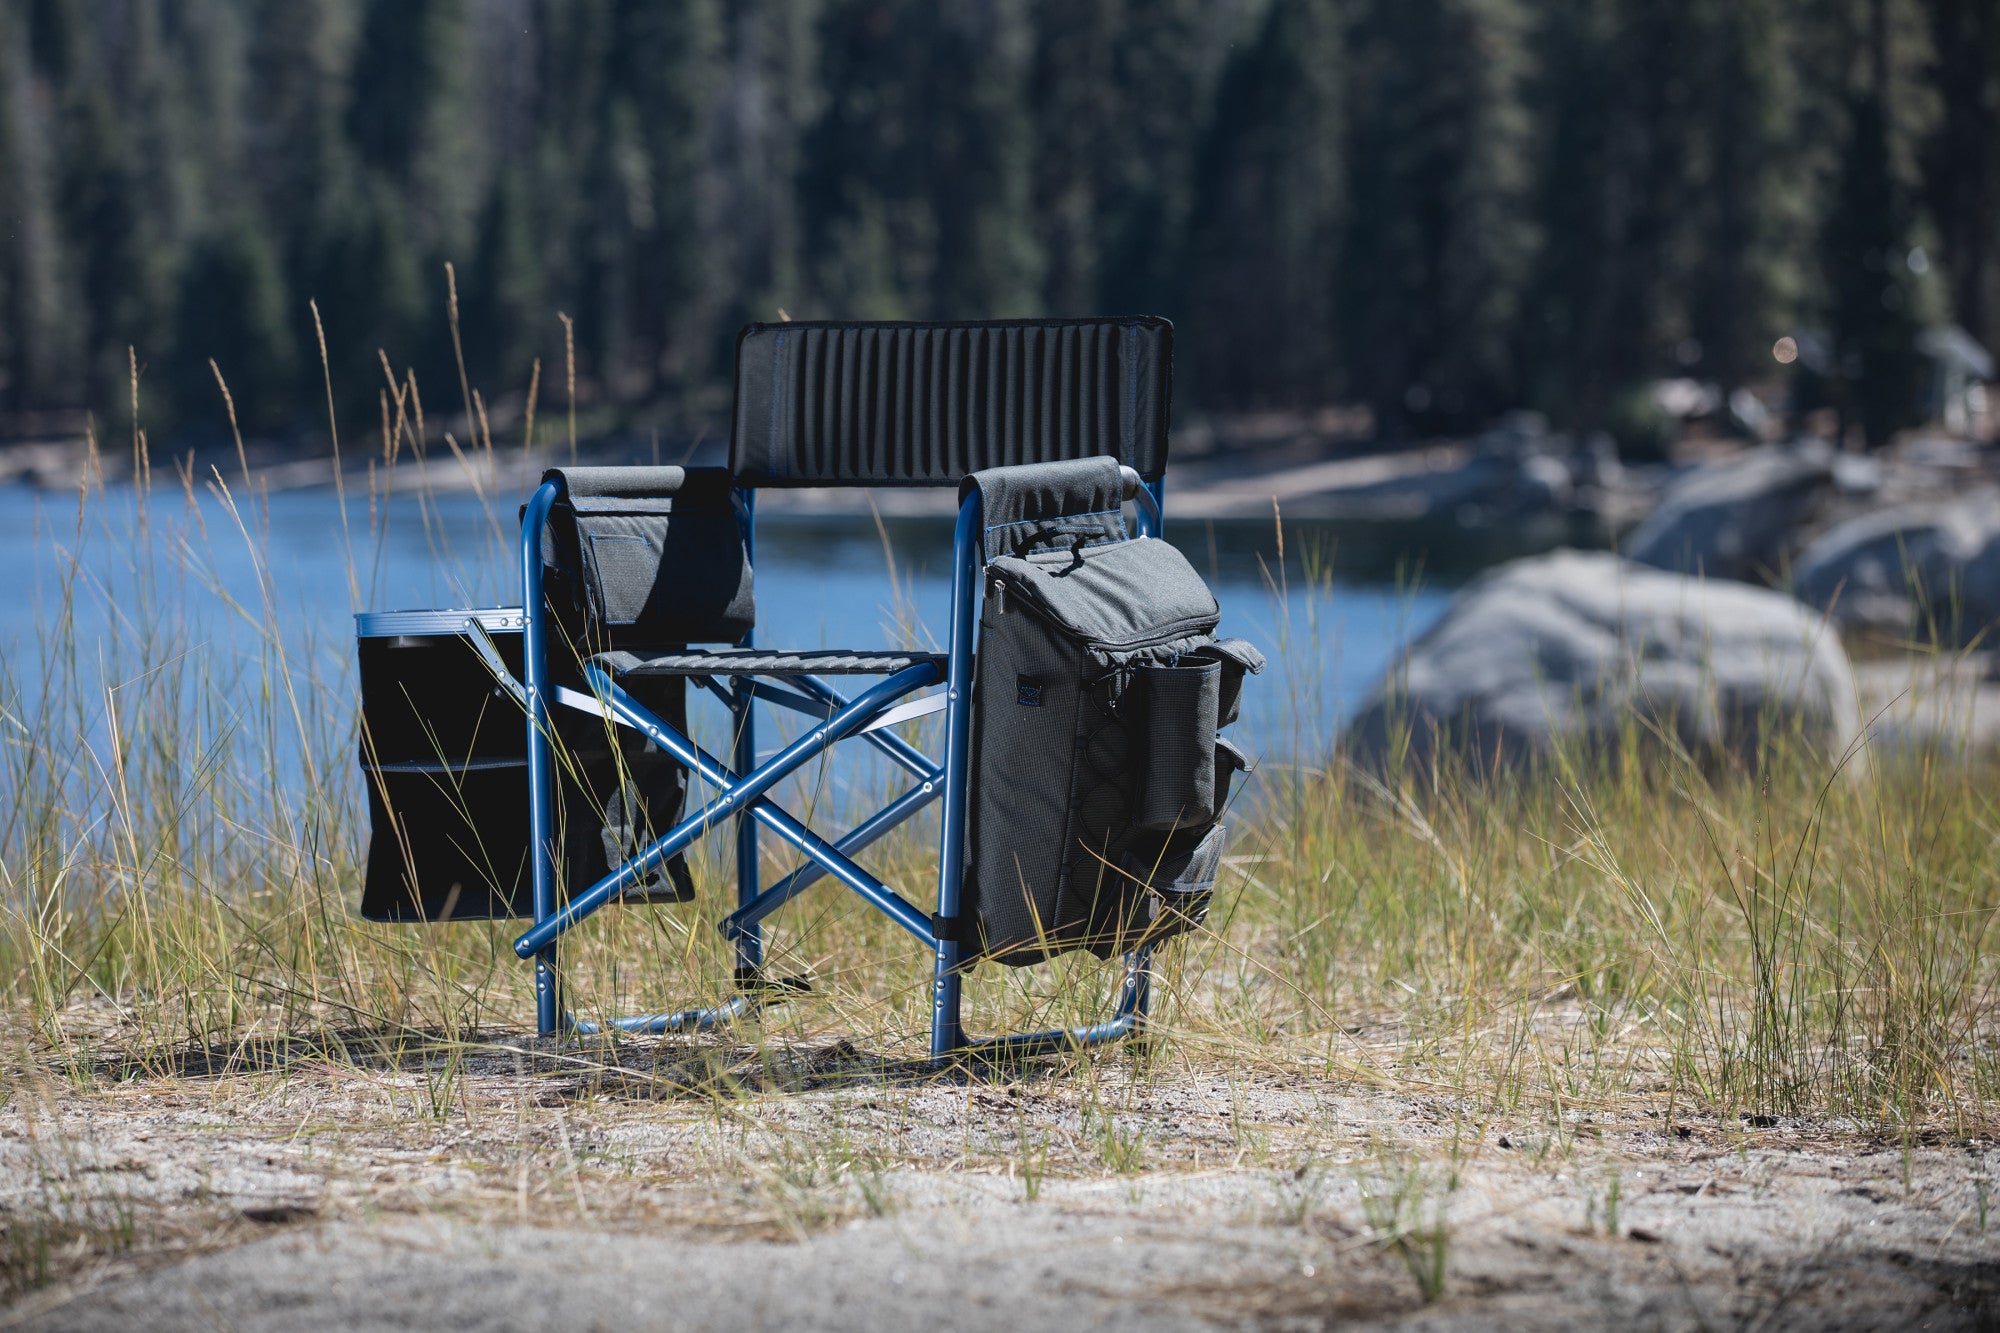 Indianapolis Colts - Fusion Camping Chair